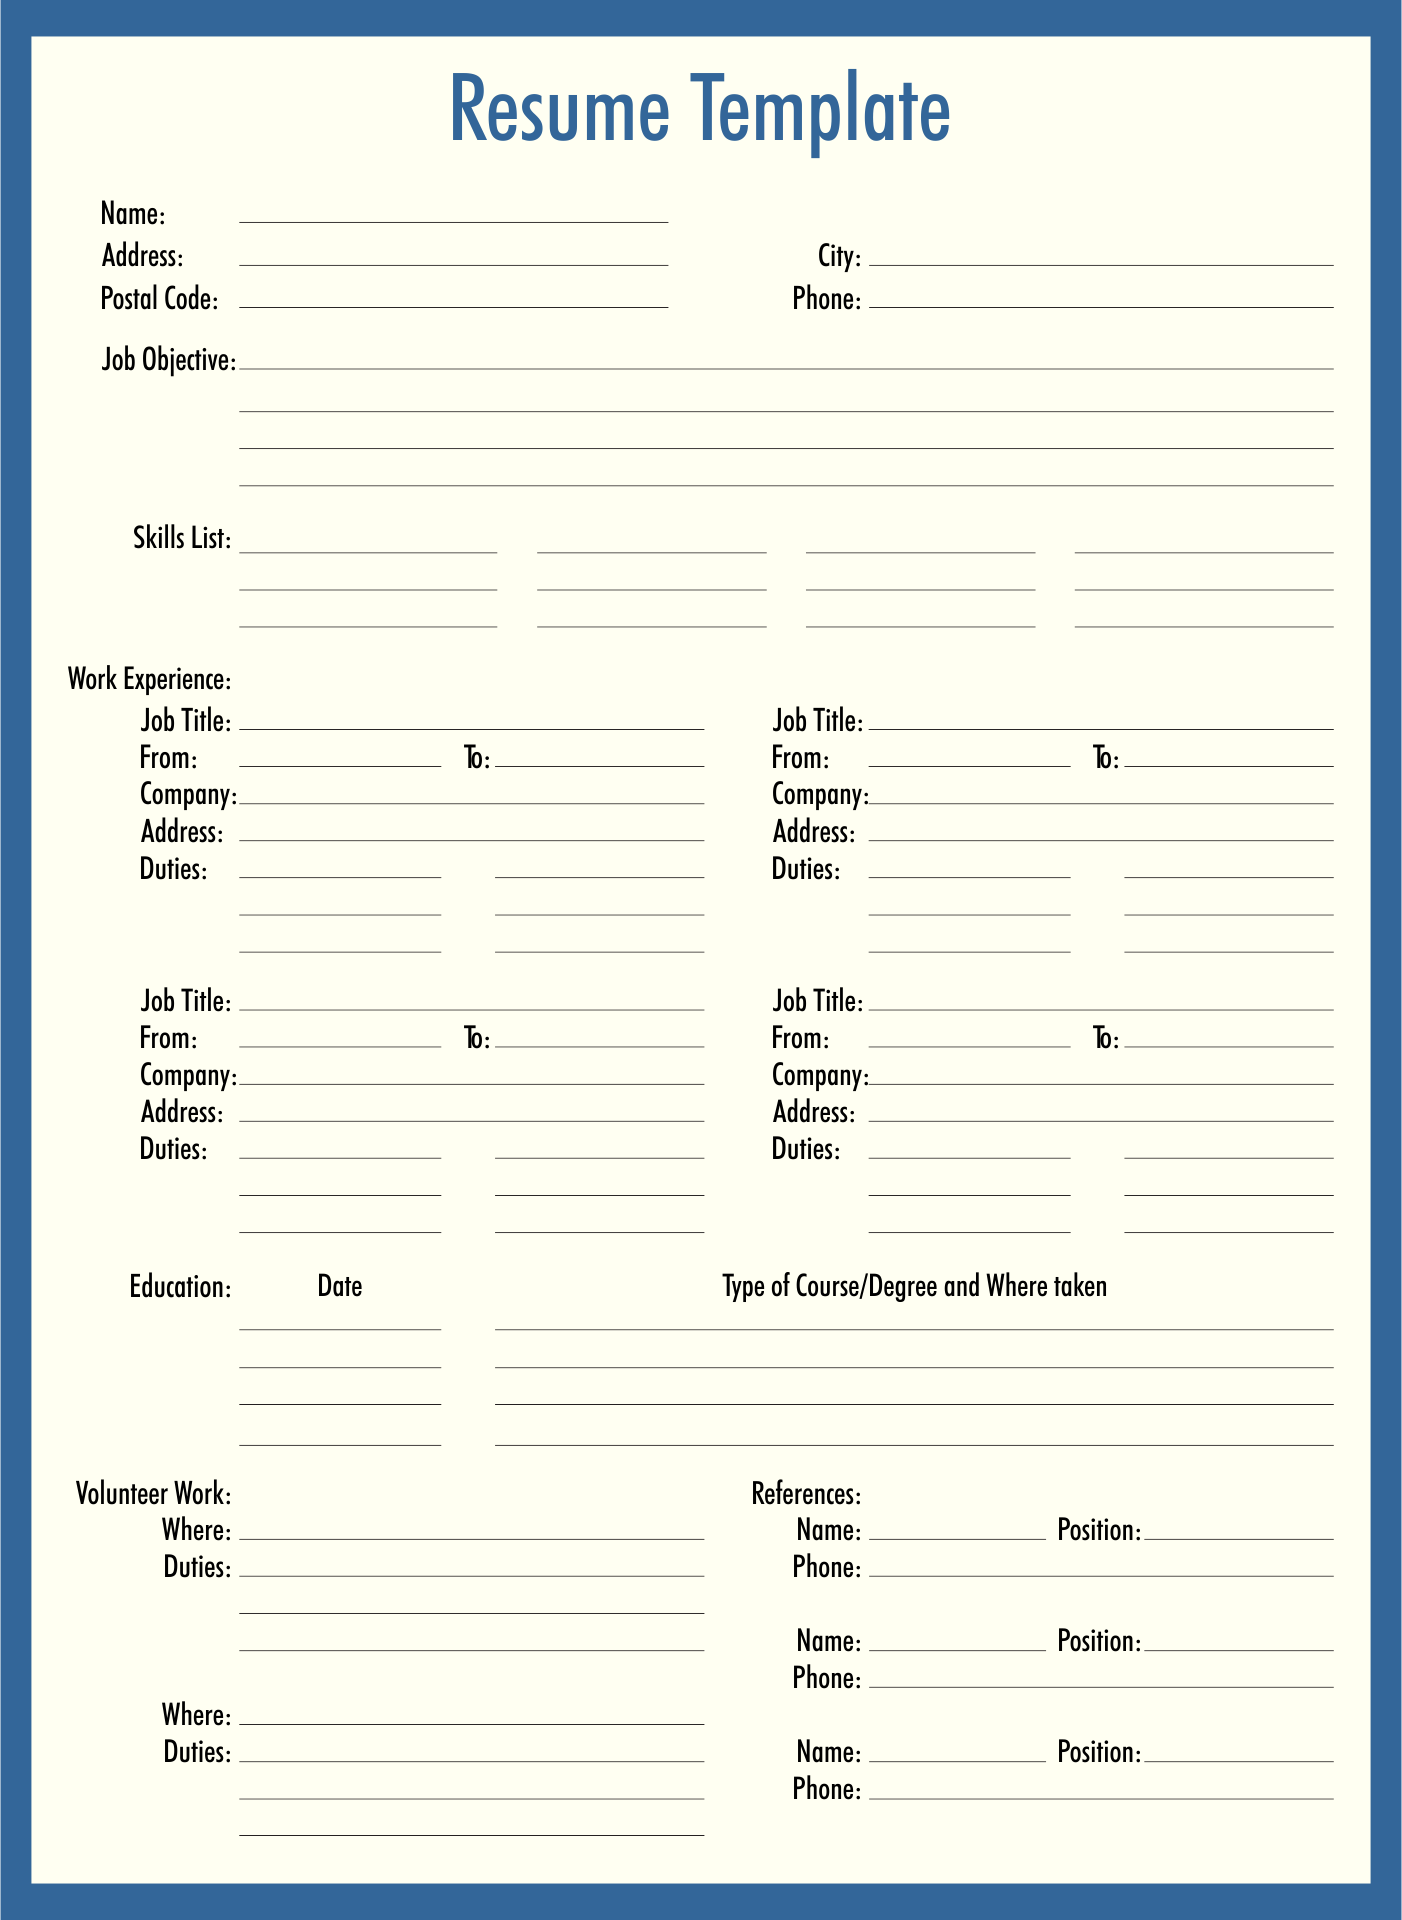 7 Best Images of Fill In Blank Printable Resume - Free ...